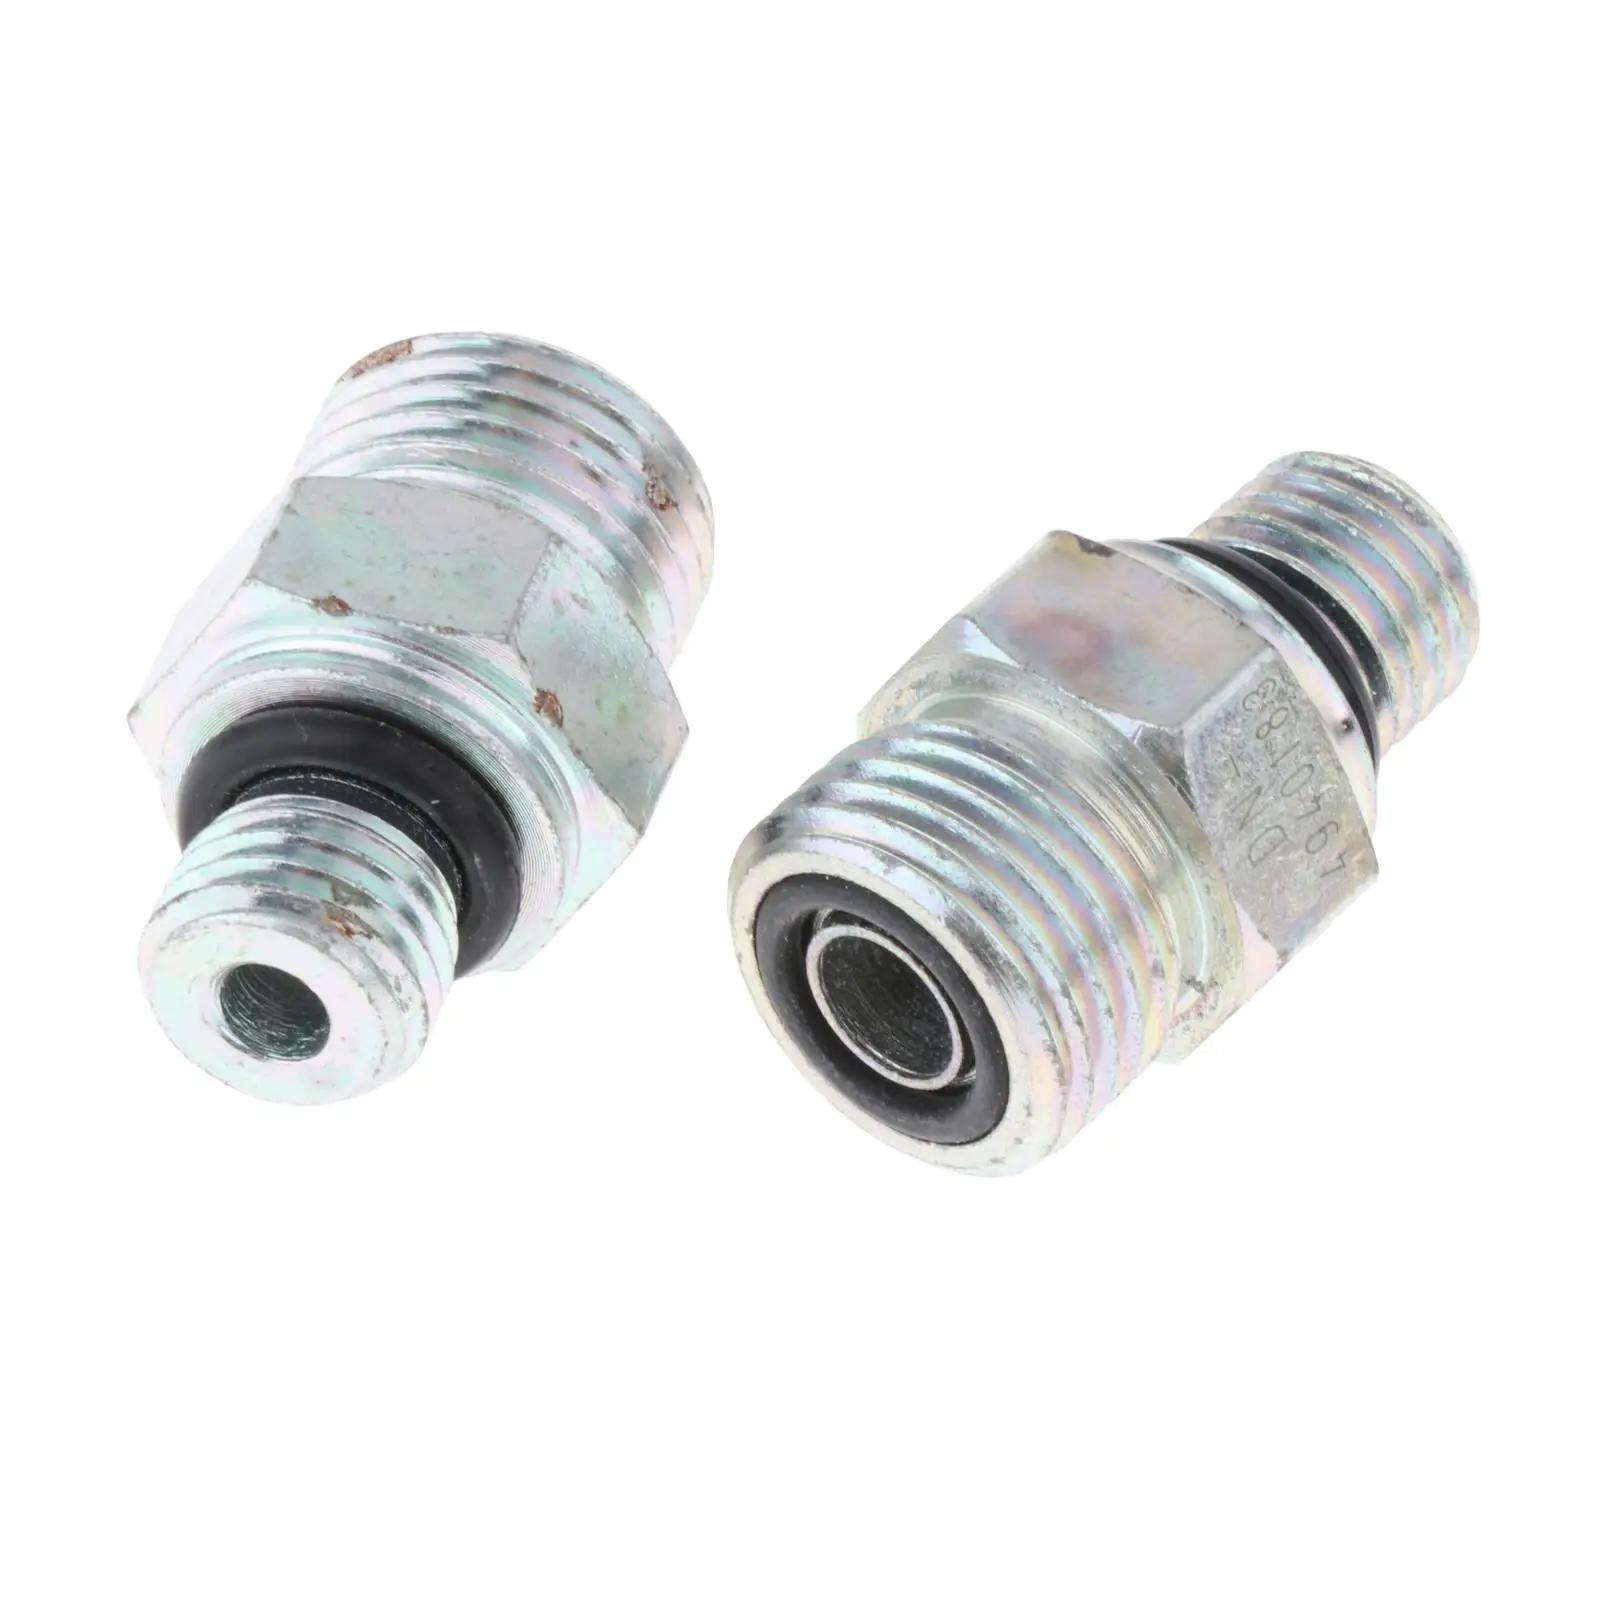 2 Pieces Turbo Oil feed Line Fitting Easy Installation Metal turbo oil feed Line Parts with O Rings for Automotive Engine Parts